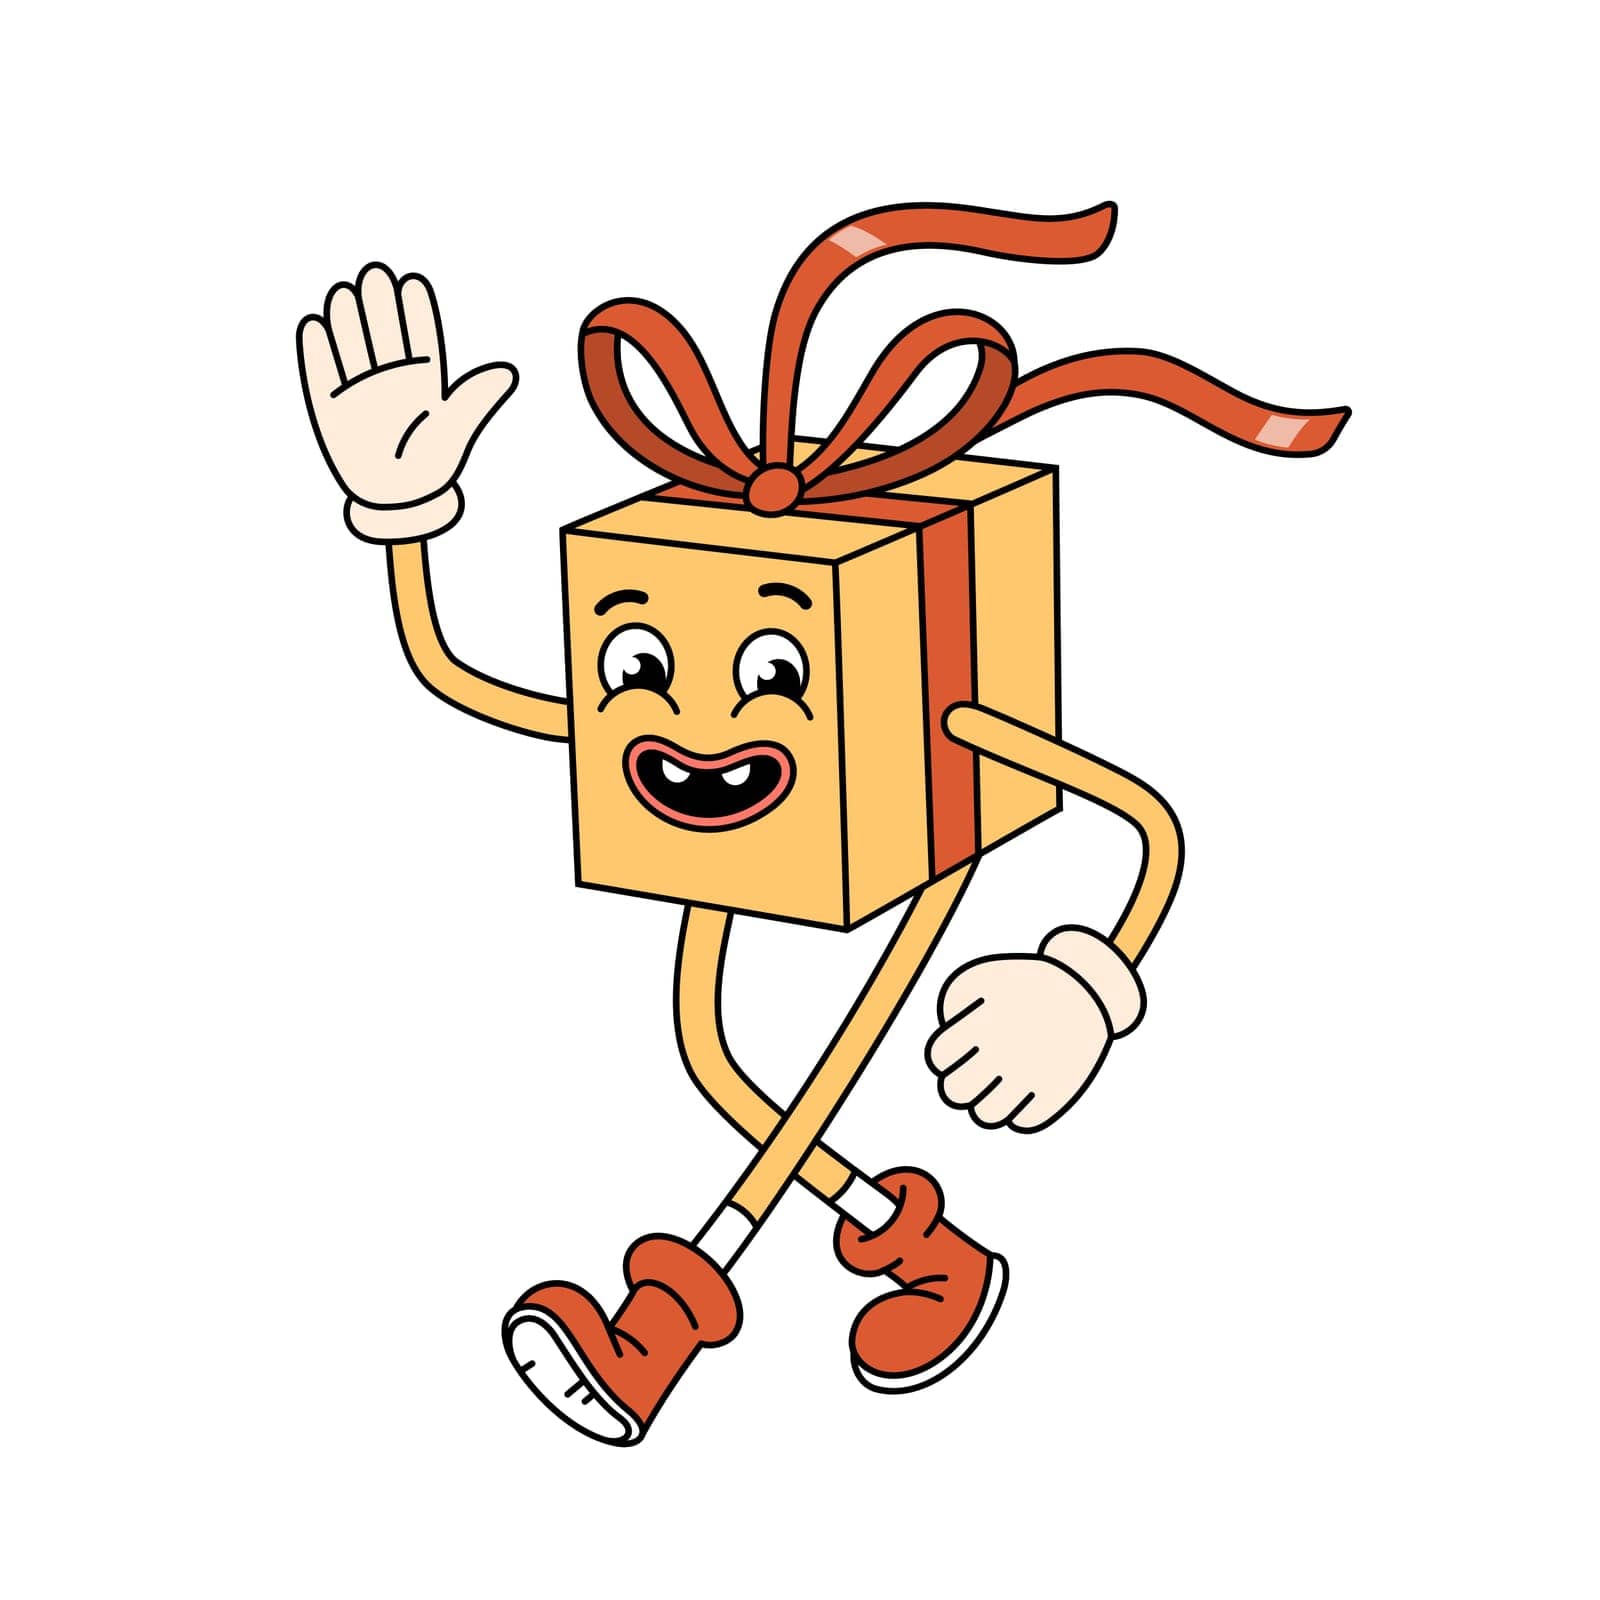 Groovy Christmas gift box character waving hand. Retro groovy cartoon character in doodle style. Vector illustration isolated on white.